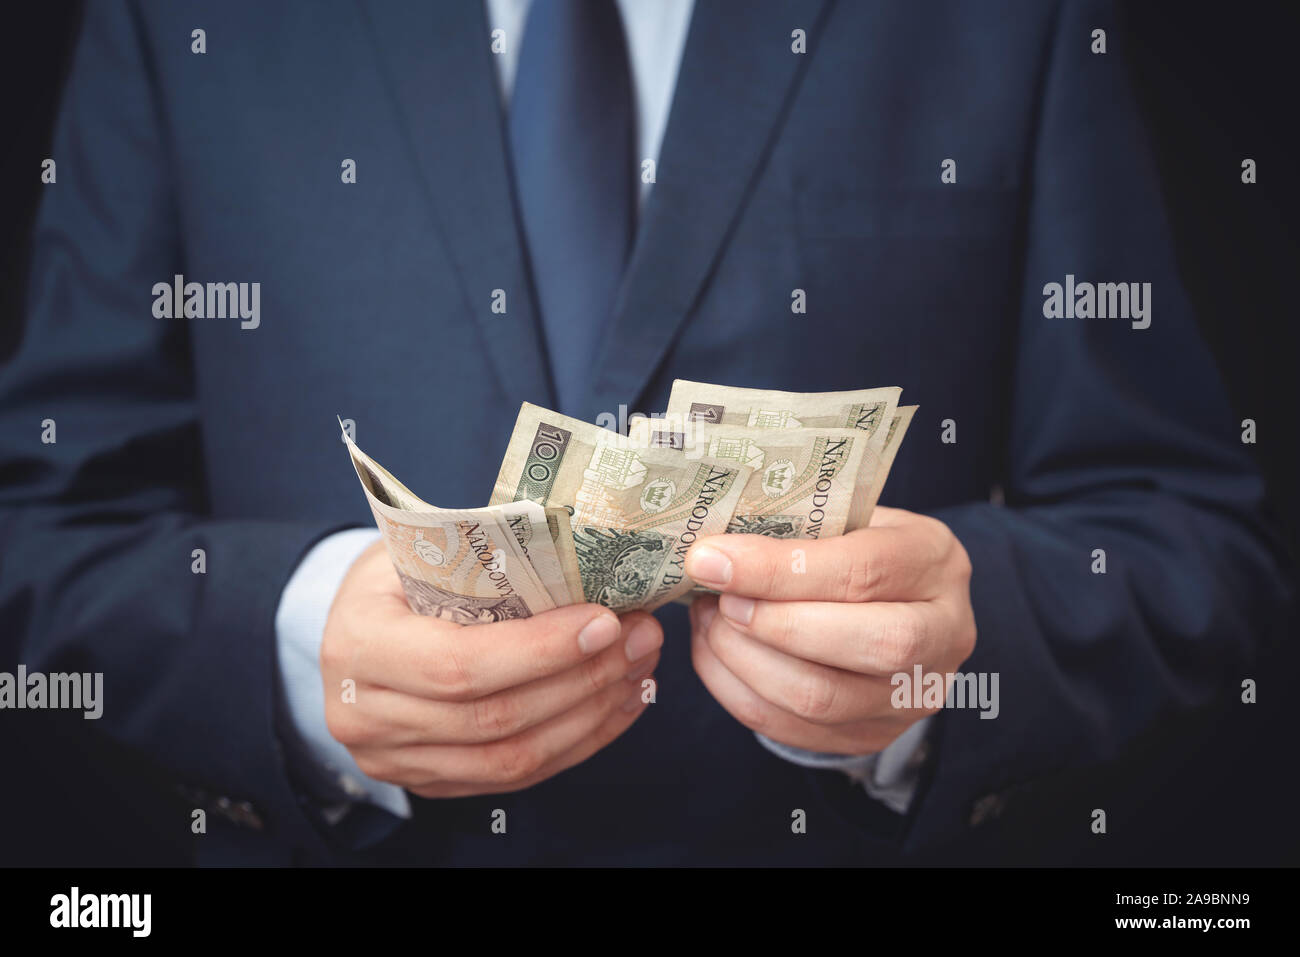 Man in a suit counts Polish banknotes. Business and finance, salary concept Stock Photo